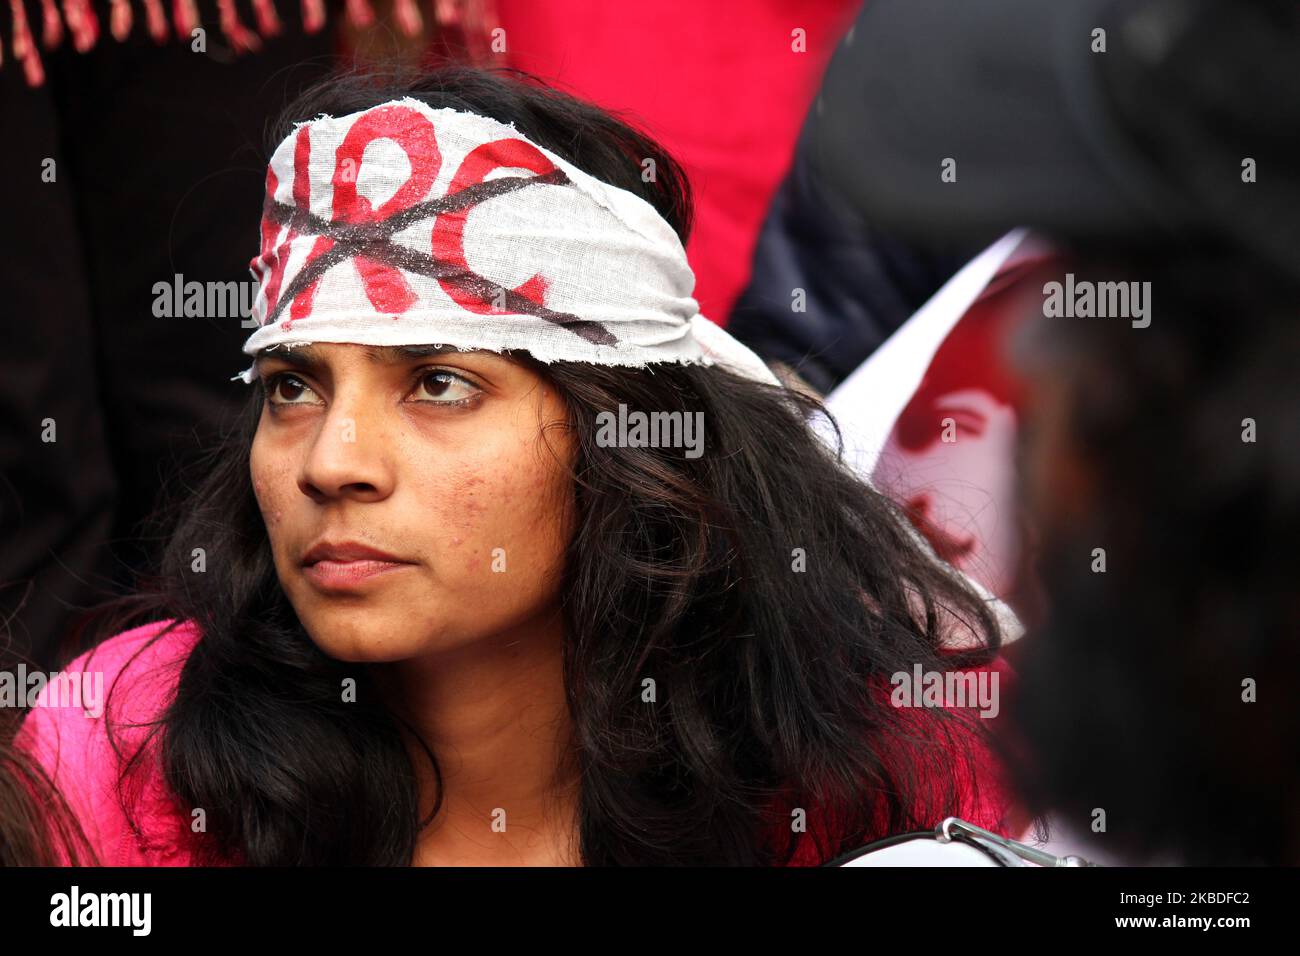 A protester is seen during the protest against the government's Citizenship Amendment Bill (CAB) and National Register of Citizens (NRC) at Jantar Mantar in New Delhi on December 24, 2019. The Citizenship Amendment Act has triggered nationwide protests as it paved way for six minority communities Hindus, Sikhs, Jain, Buddhists, Zoroastrians and Christians who came to India from Pakistan, Bangladesh or Afghanistan to escape religious persecution before December 31, 2014 to get Indian citizenship. So far, 17 people have died and thousands arrested in two weeks of protests in India against the co Stock Photo